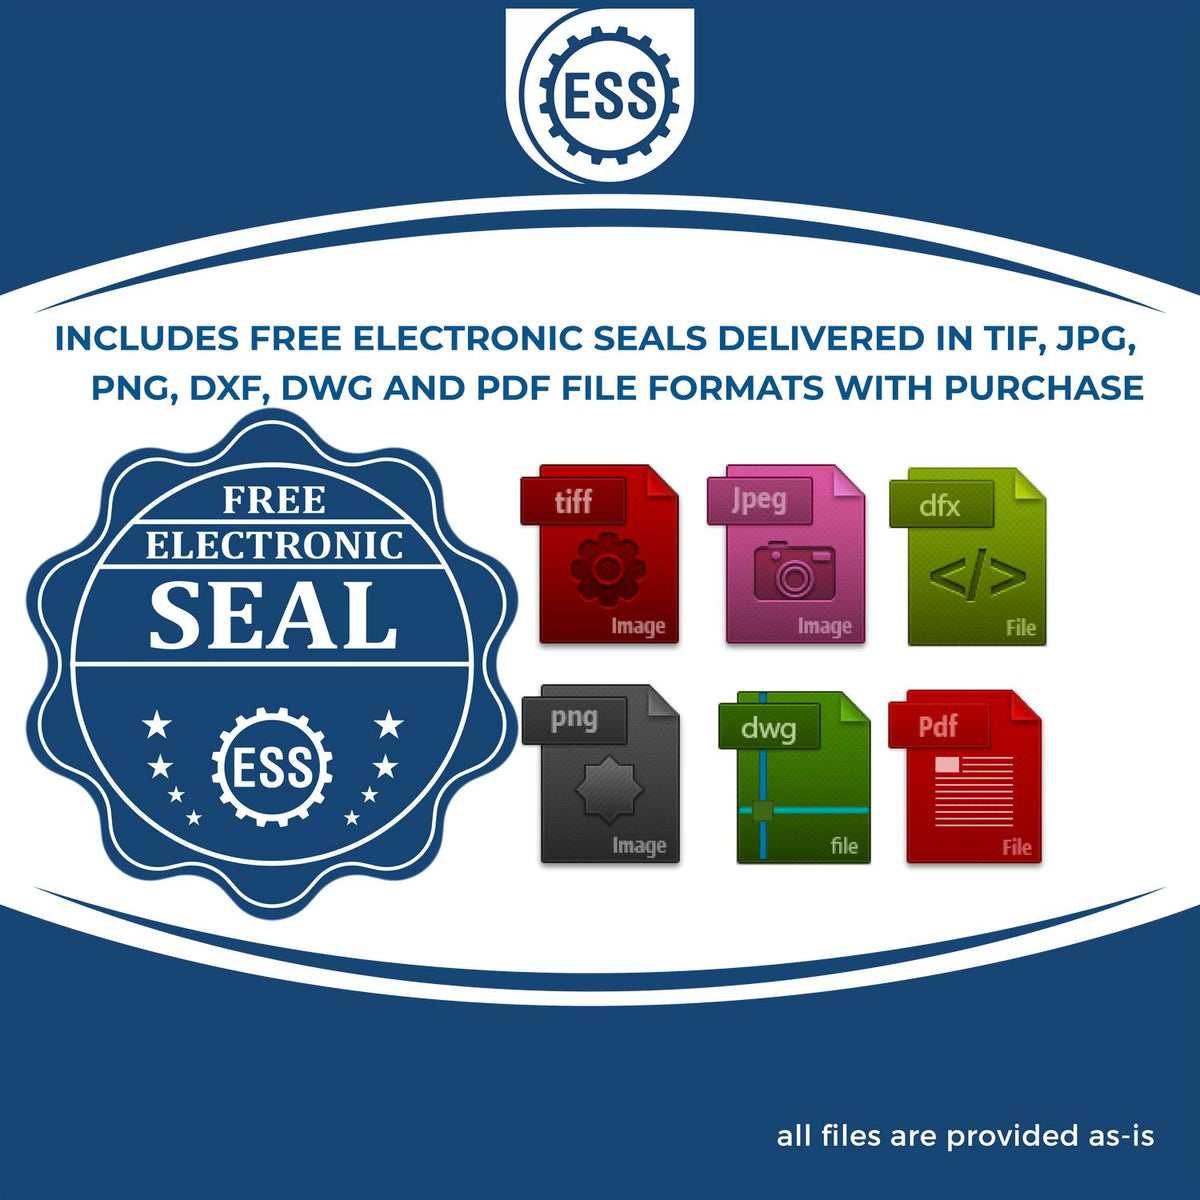 An infographic for the free electronic seal for the Heavy-Duty South Carolina Rectangular Notary Stamp illustrating the different file type icons such as DXF, DWG, TIF, JPG and PNG.